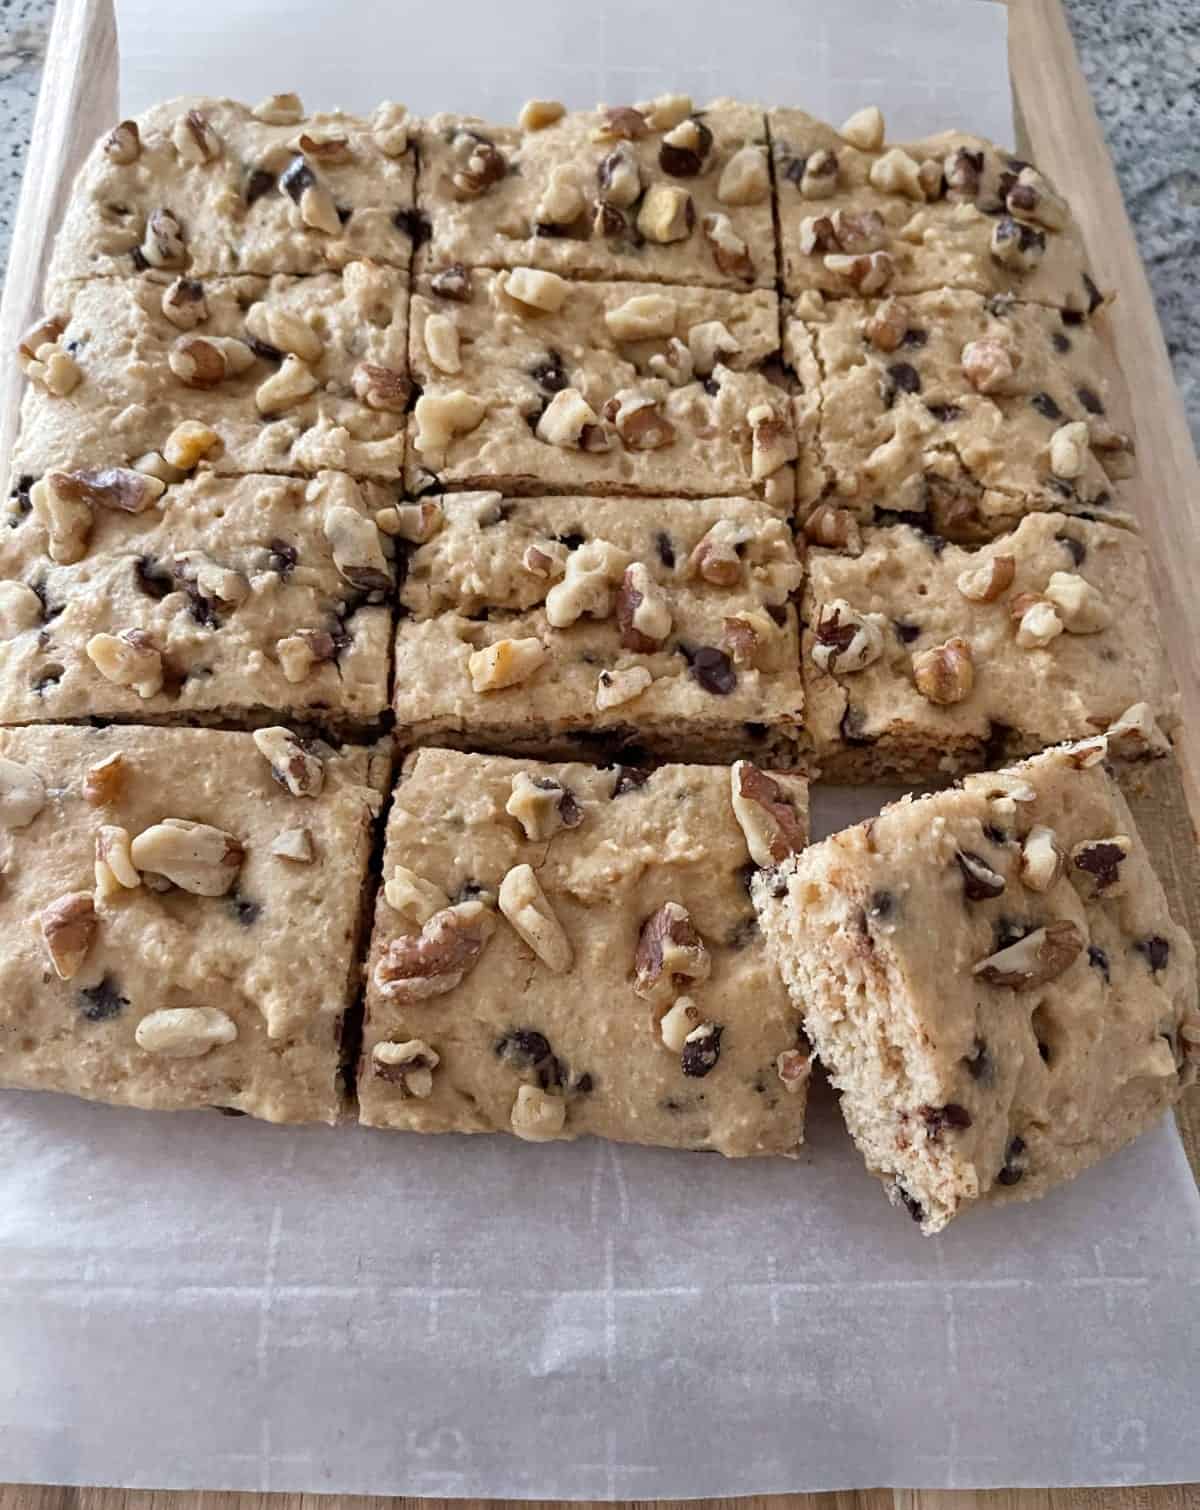 12 pieces of Chocolate Chip Kodiak Quick Cake on parchment on cutting board.